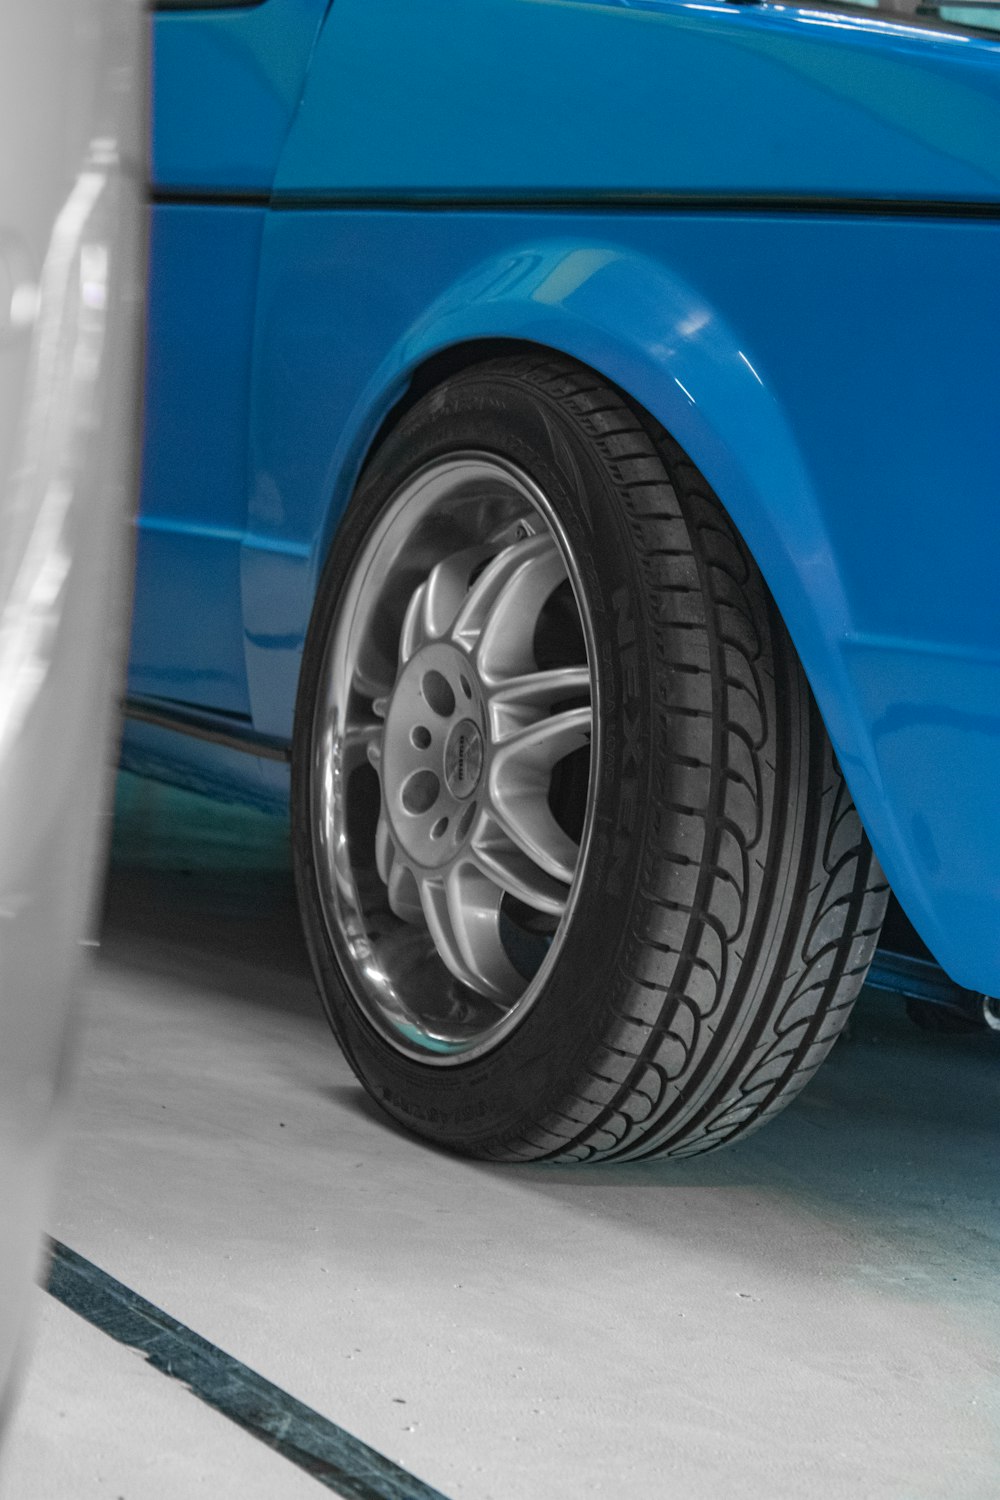 a close up of a tire on a blue car